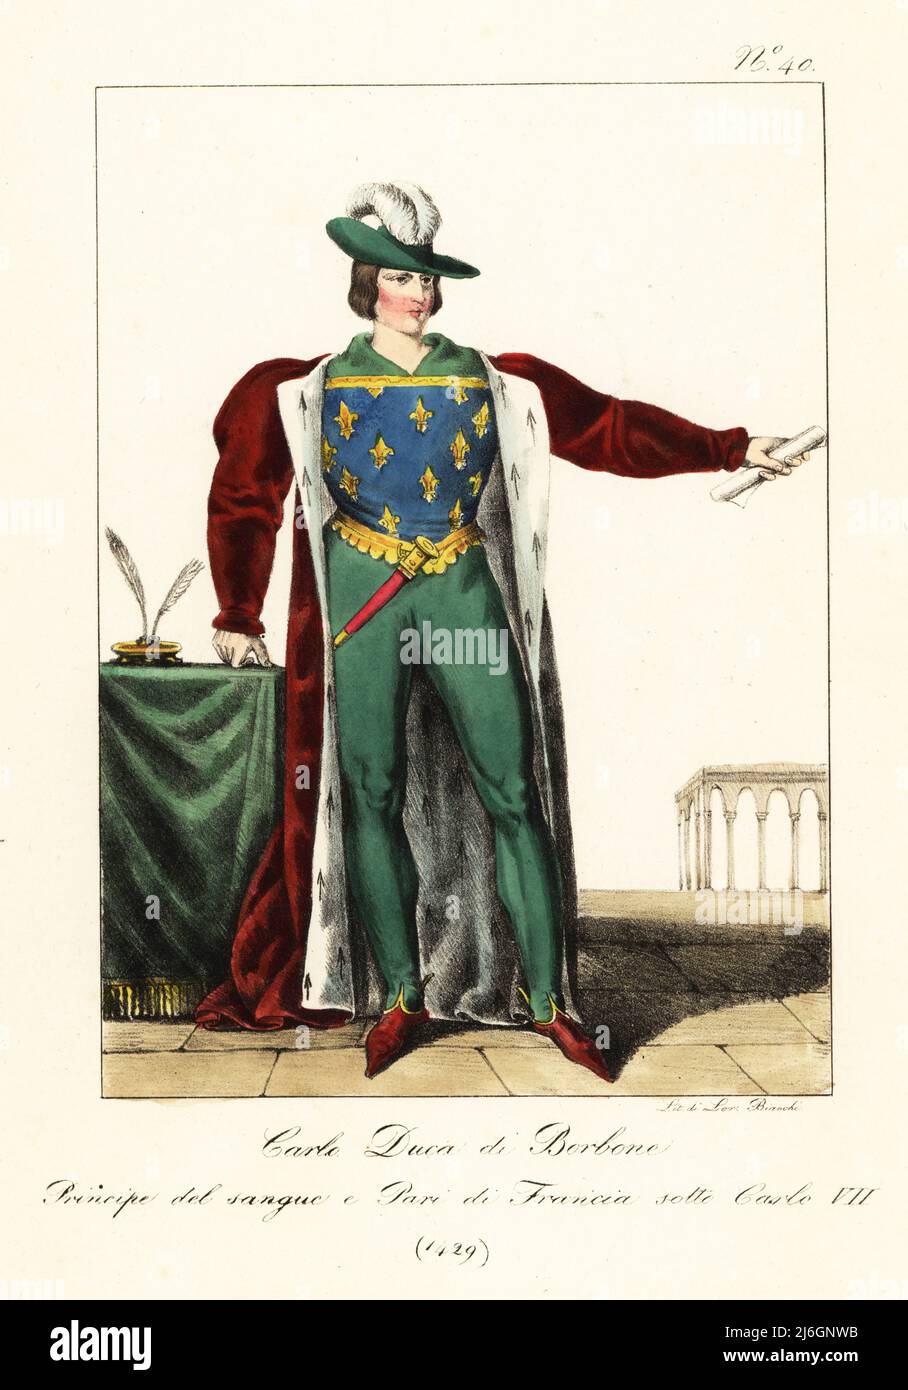 Charles I, Duke of Bourbon, 1429. Duke of royal blood, peer under King Charles VII of France. In plumed cap, velvet coat with ermine lining, armorial doublet with fleurs-de-lys, green pantalons, pointed shoes, dagger on belt. Charles Duc de Bourbon. Prince du sang et Pair de France sous Charles VII. Handcoloured lithograph by Lorenzo Bianchi after Hippolyte Lecomte from Costumi civili e militari della monarchia francese dal 1200 al 1820, Naples, 1825. Italian edition of Lecomte’s Civilian and military costumes of the French monarchy from 1200 to 1820. Stock Photo